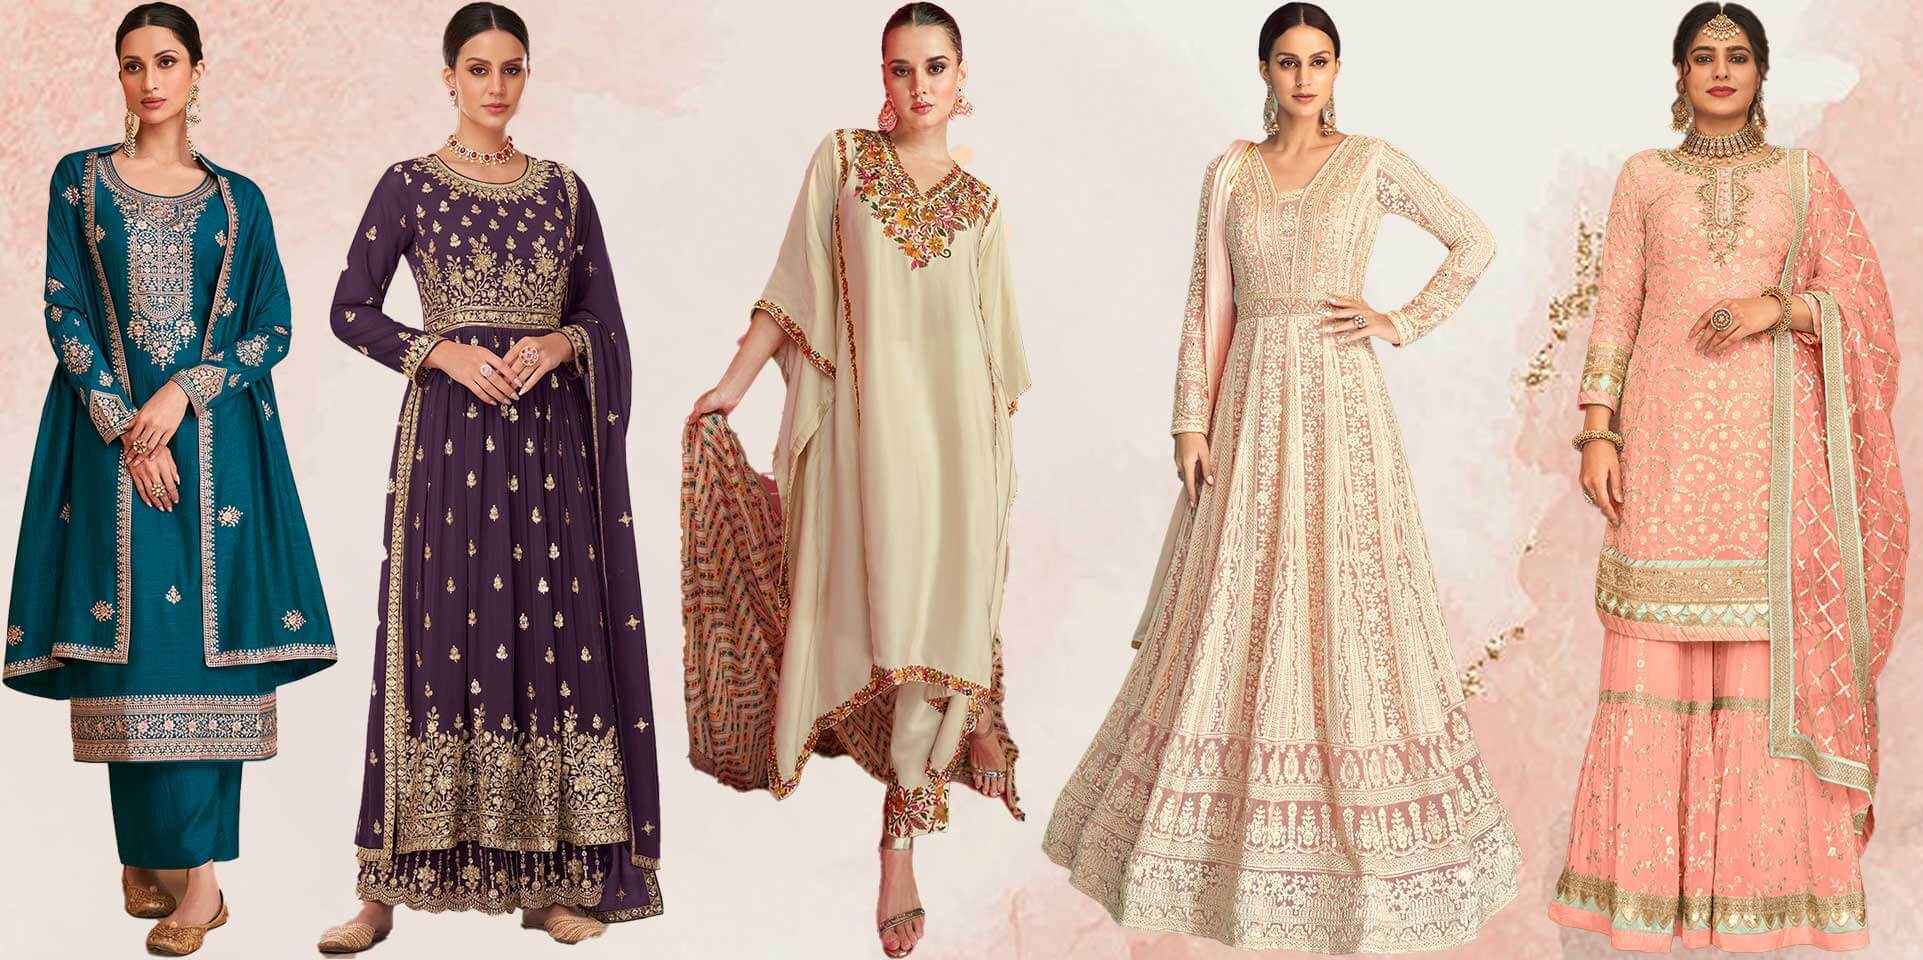 KAAJH Evening Gowns : Buy KAAJH Blue Gold Printed Ethnic Gown Online |  Nykaa Fashion.